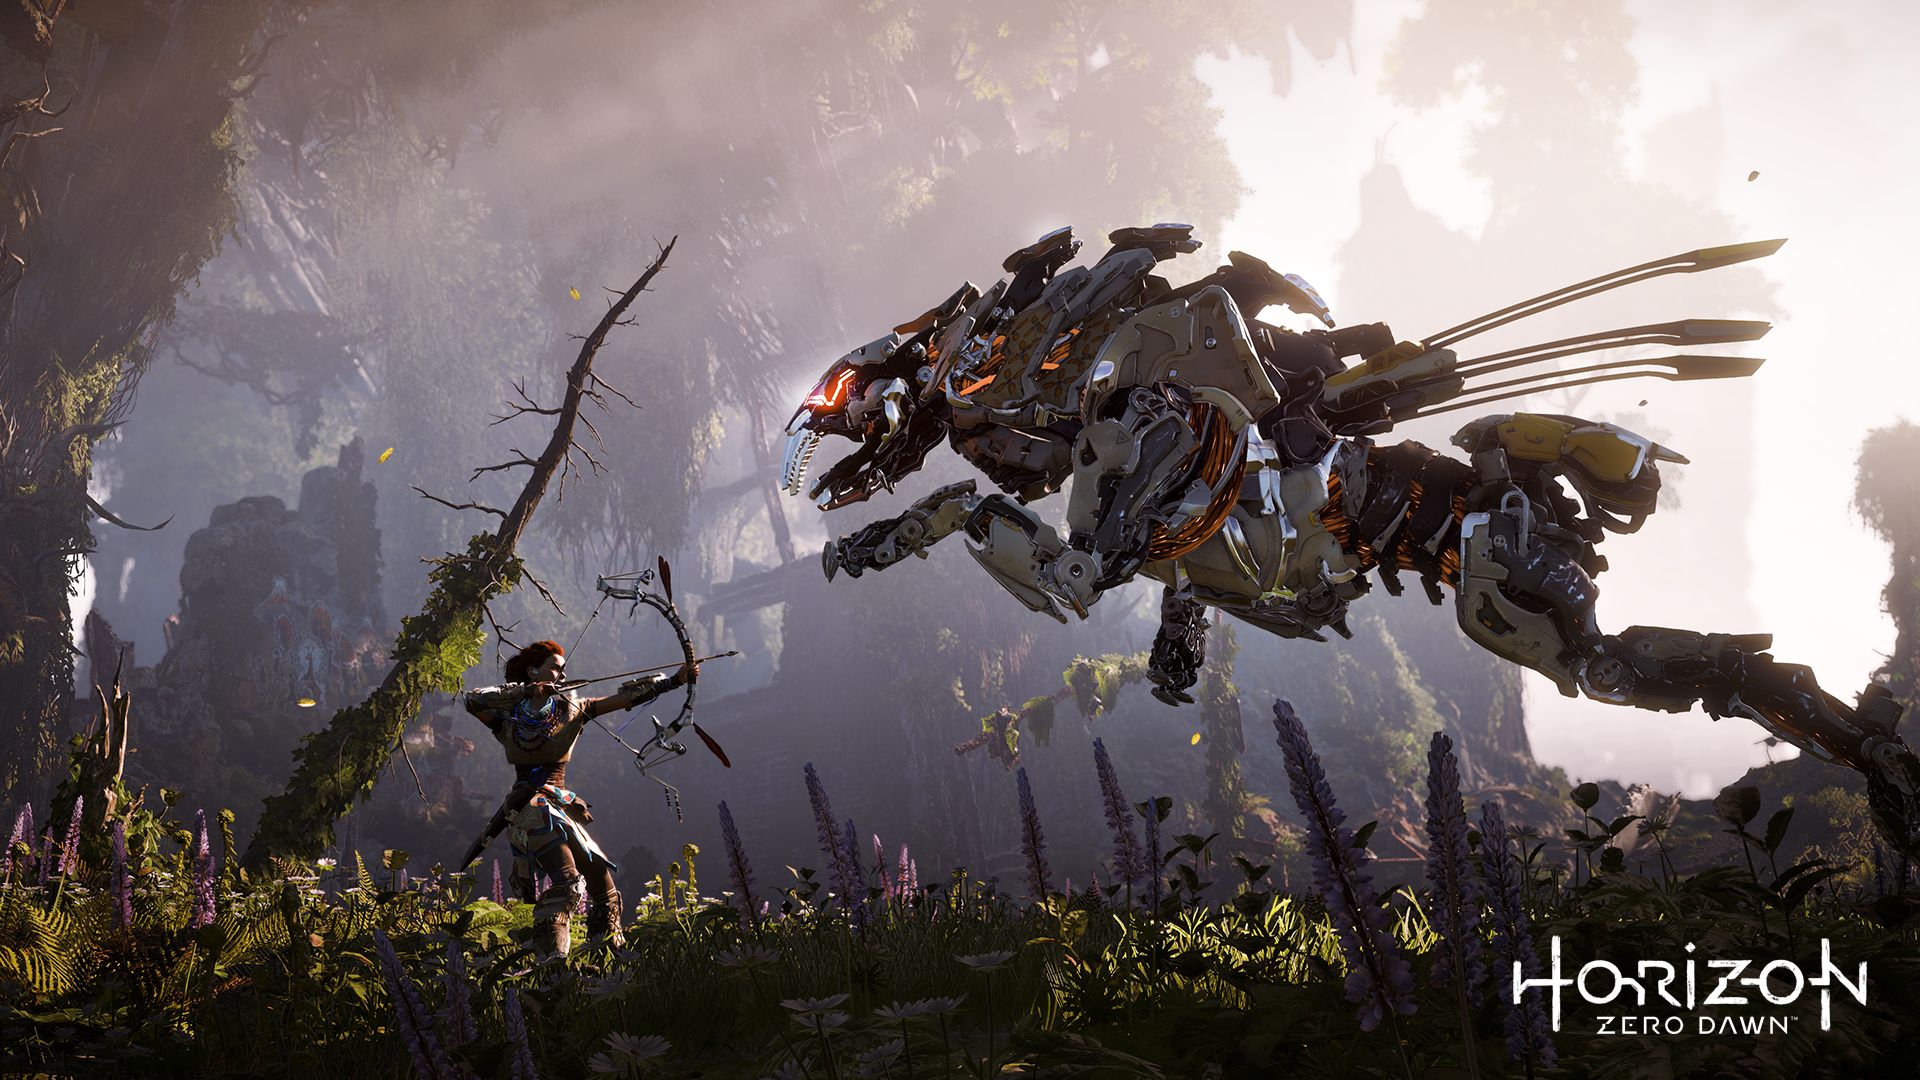 Horizon Zero Dawn Pc 1.03 Patch Is Live Now, Has Fixes For Crashing, Snow Deformation, And More